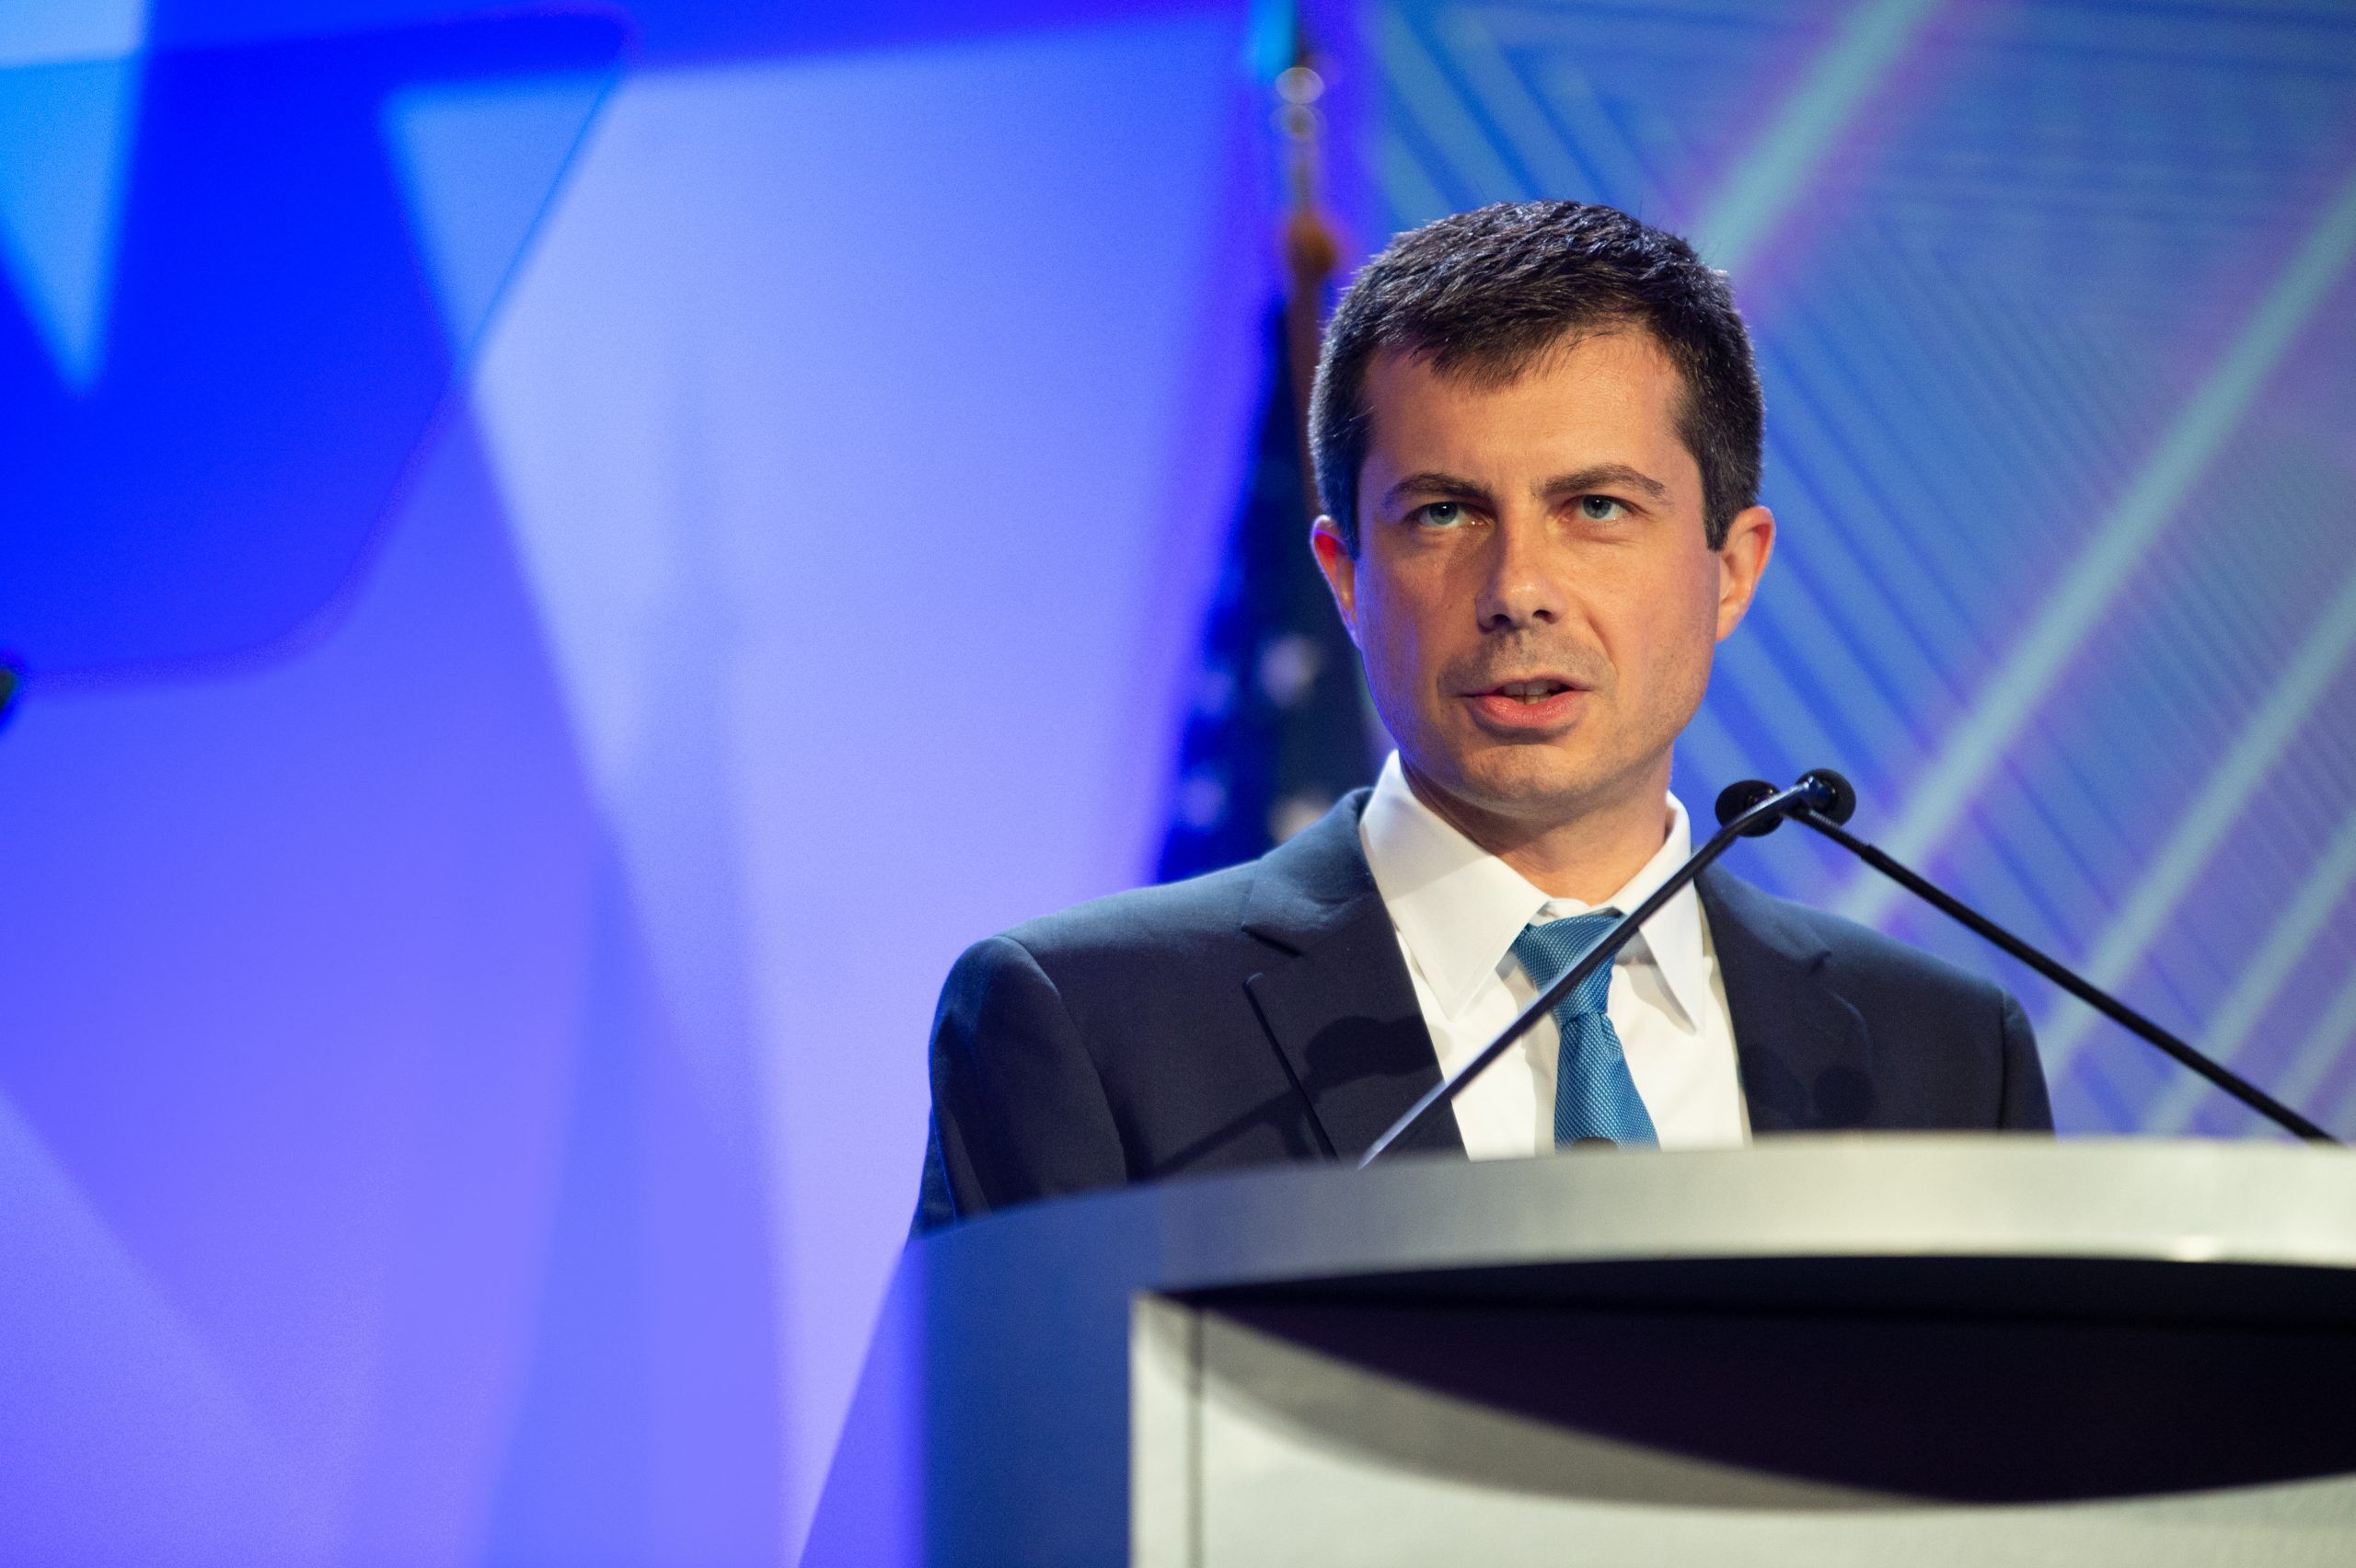 August 8, 2019: Mayor Pete Buttigieg addresses the audience at the National Association of Black Journalists convention